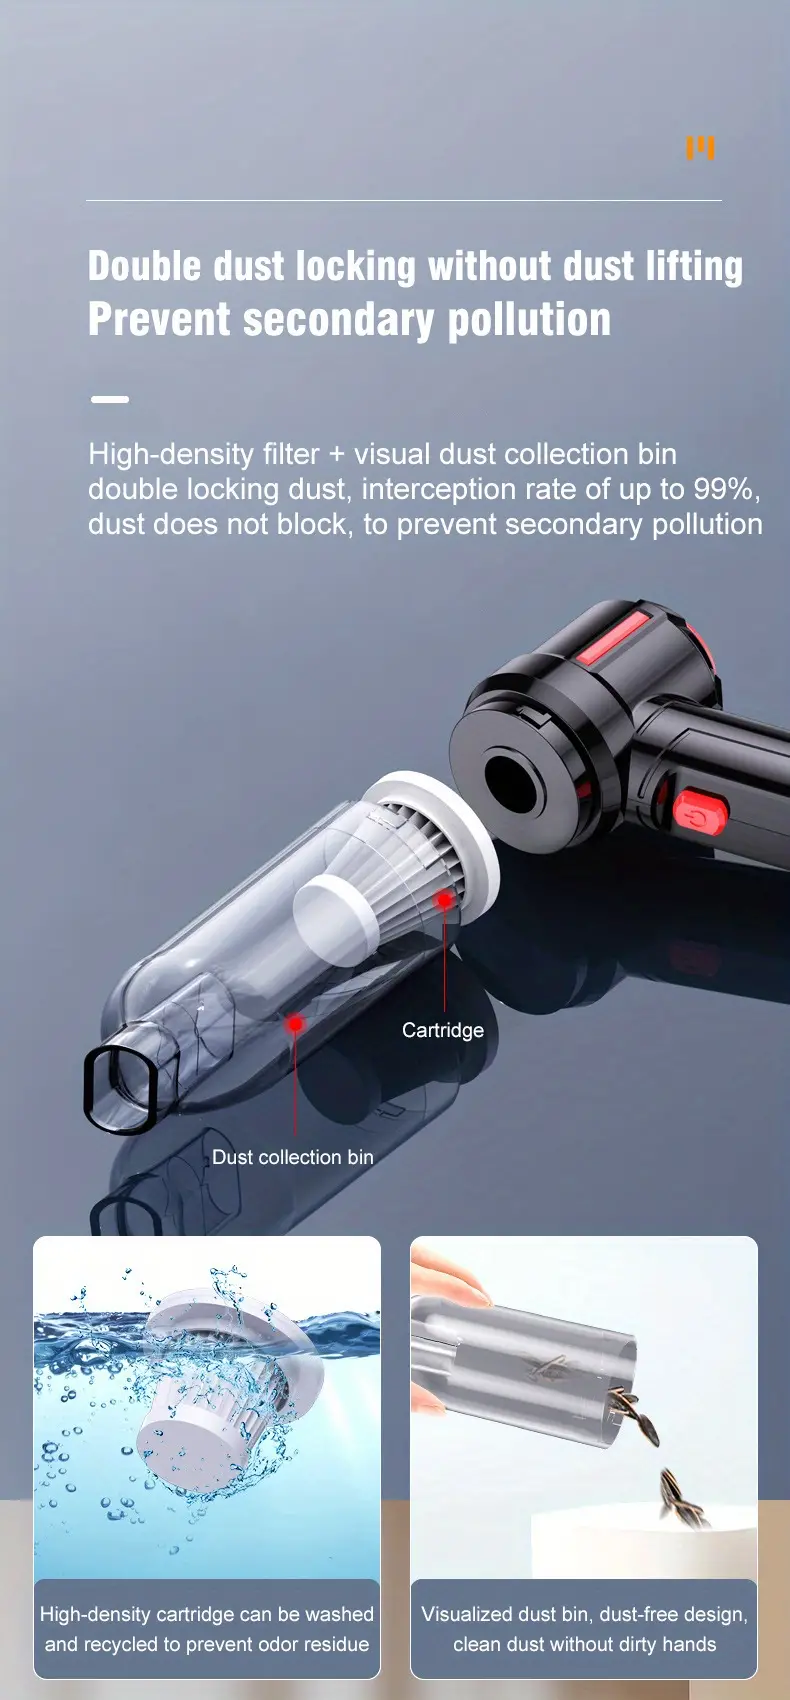 handheld vacuum cleaner cordless 3 in 1 portable small cordless handheld vacuum cleaner rechargeable with powerful suction wet dry mini vacuum cleaner detailing cleaning kit for car home office pet details 9